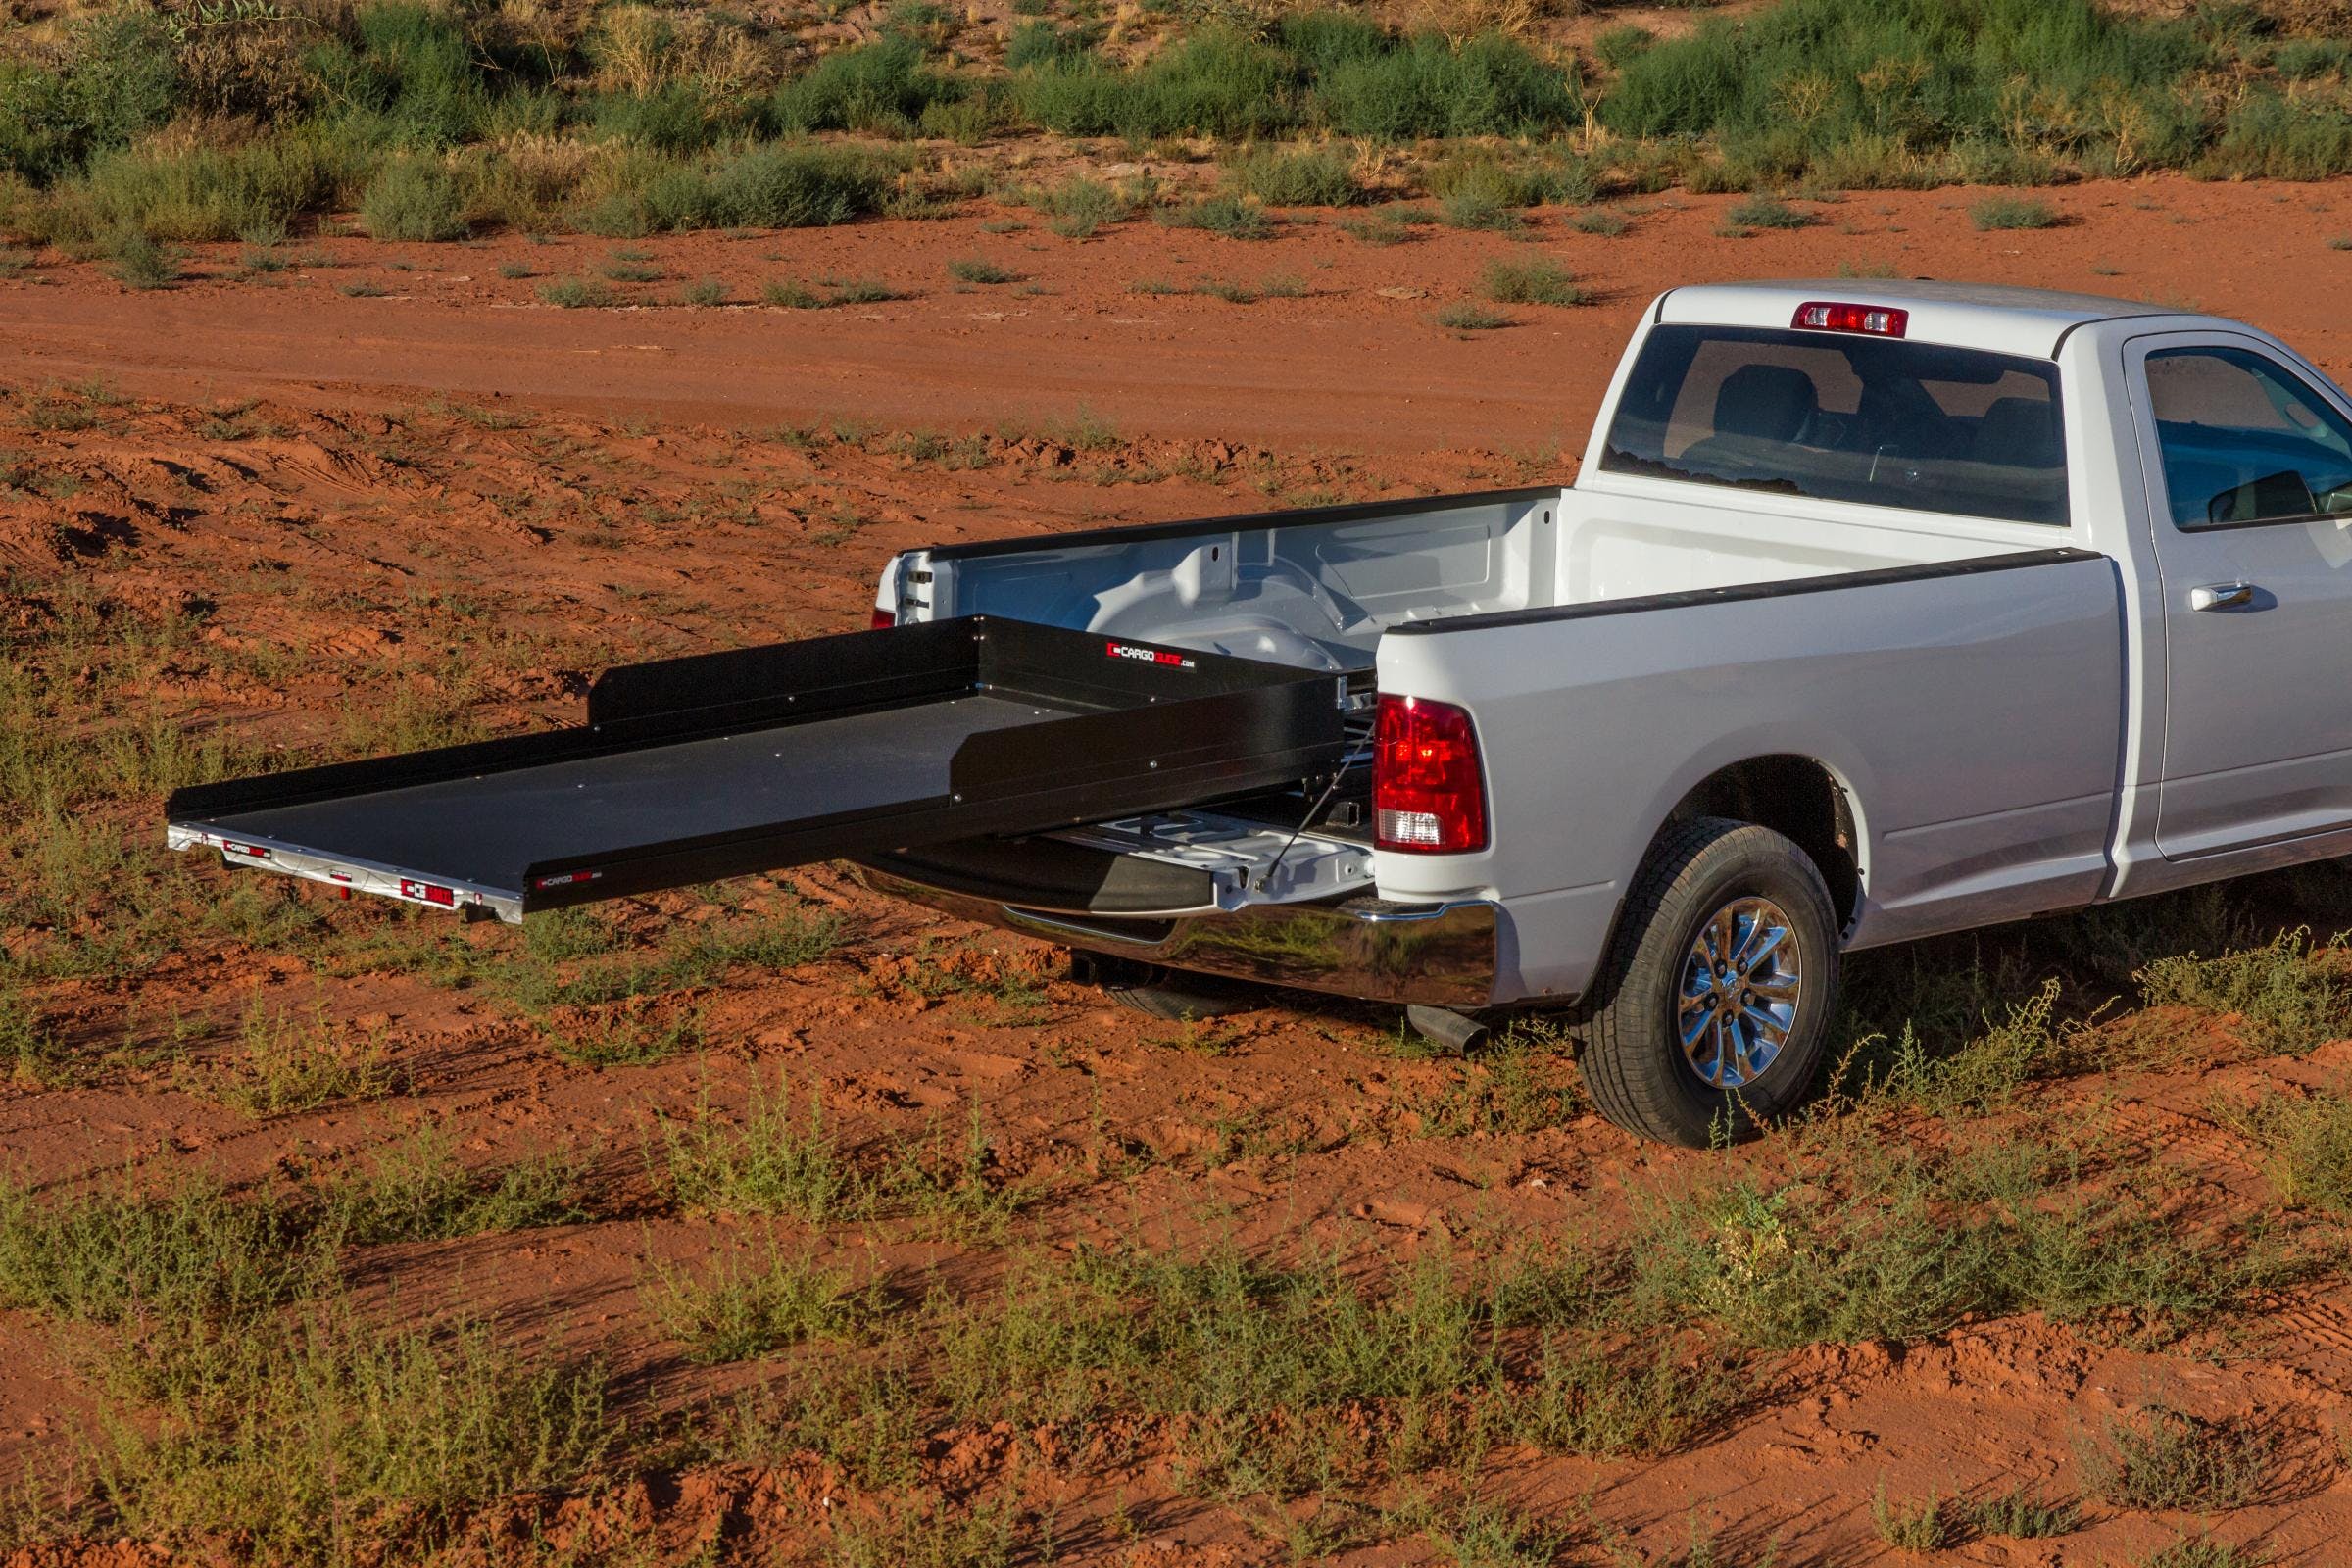 DECKED CG1500XL-8048 Slide Out Cargo Tray, 1500lb capacity, 100% ext 28 bearings, Alum Tie-Down Rails